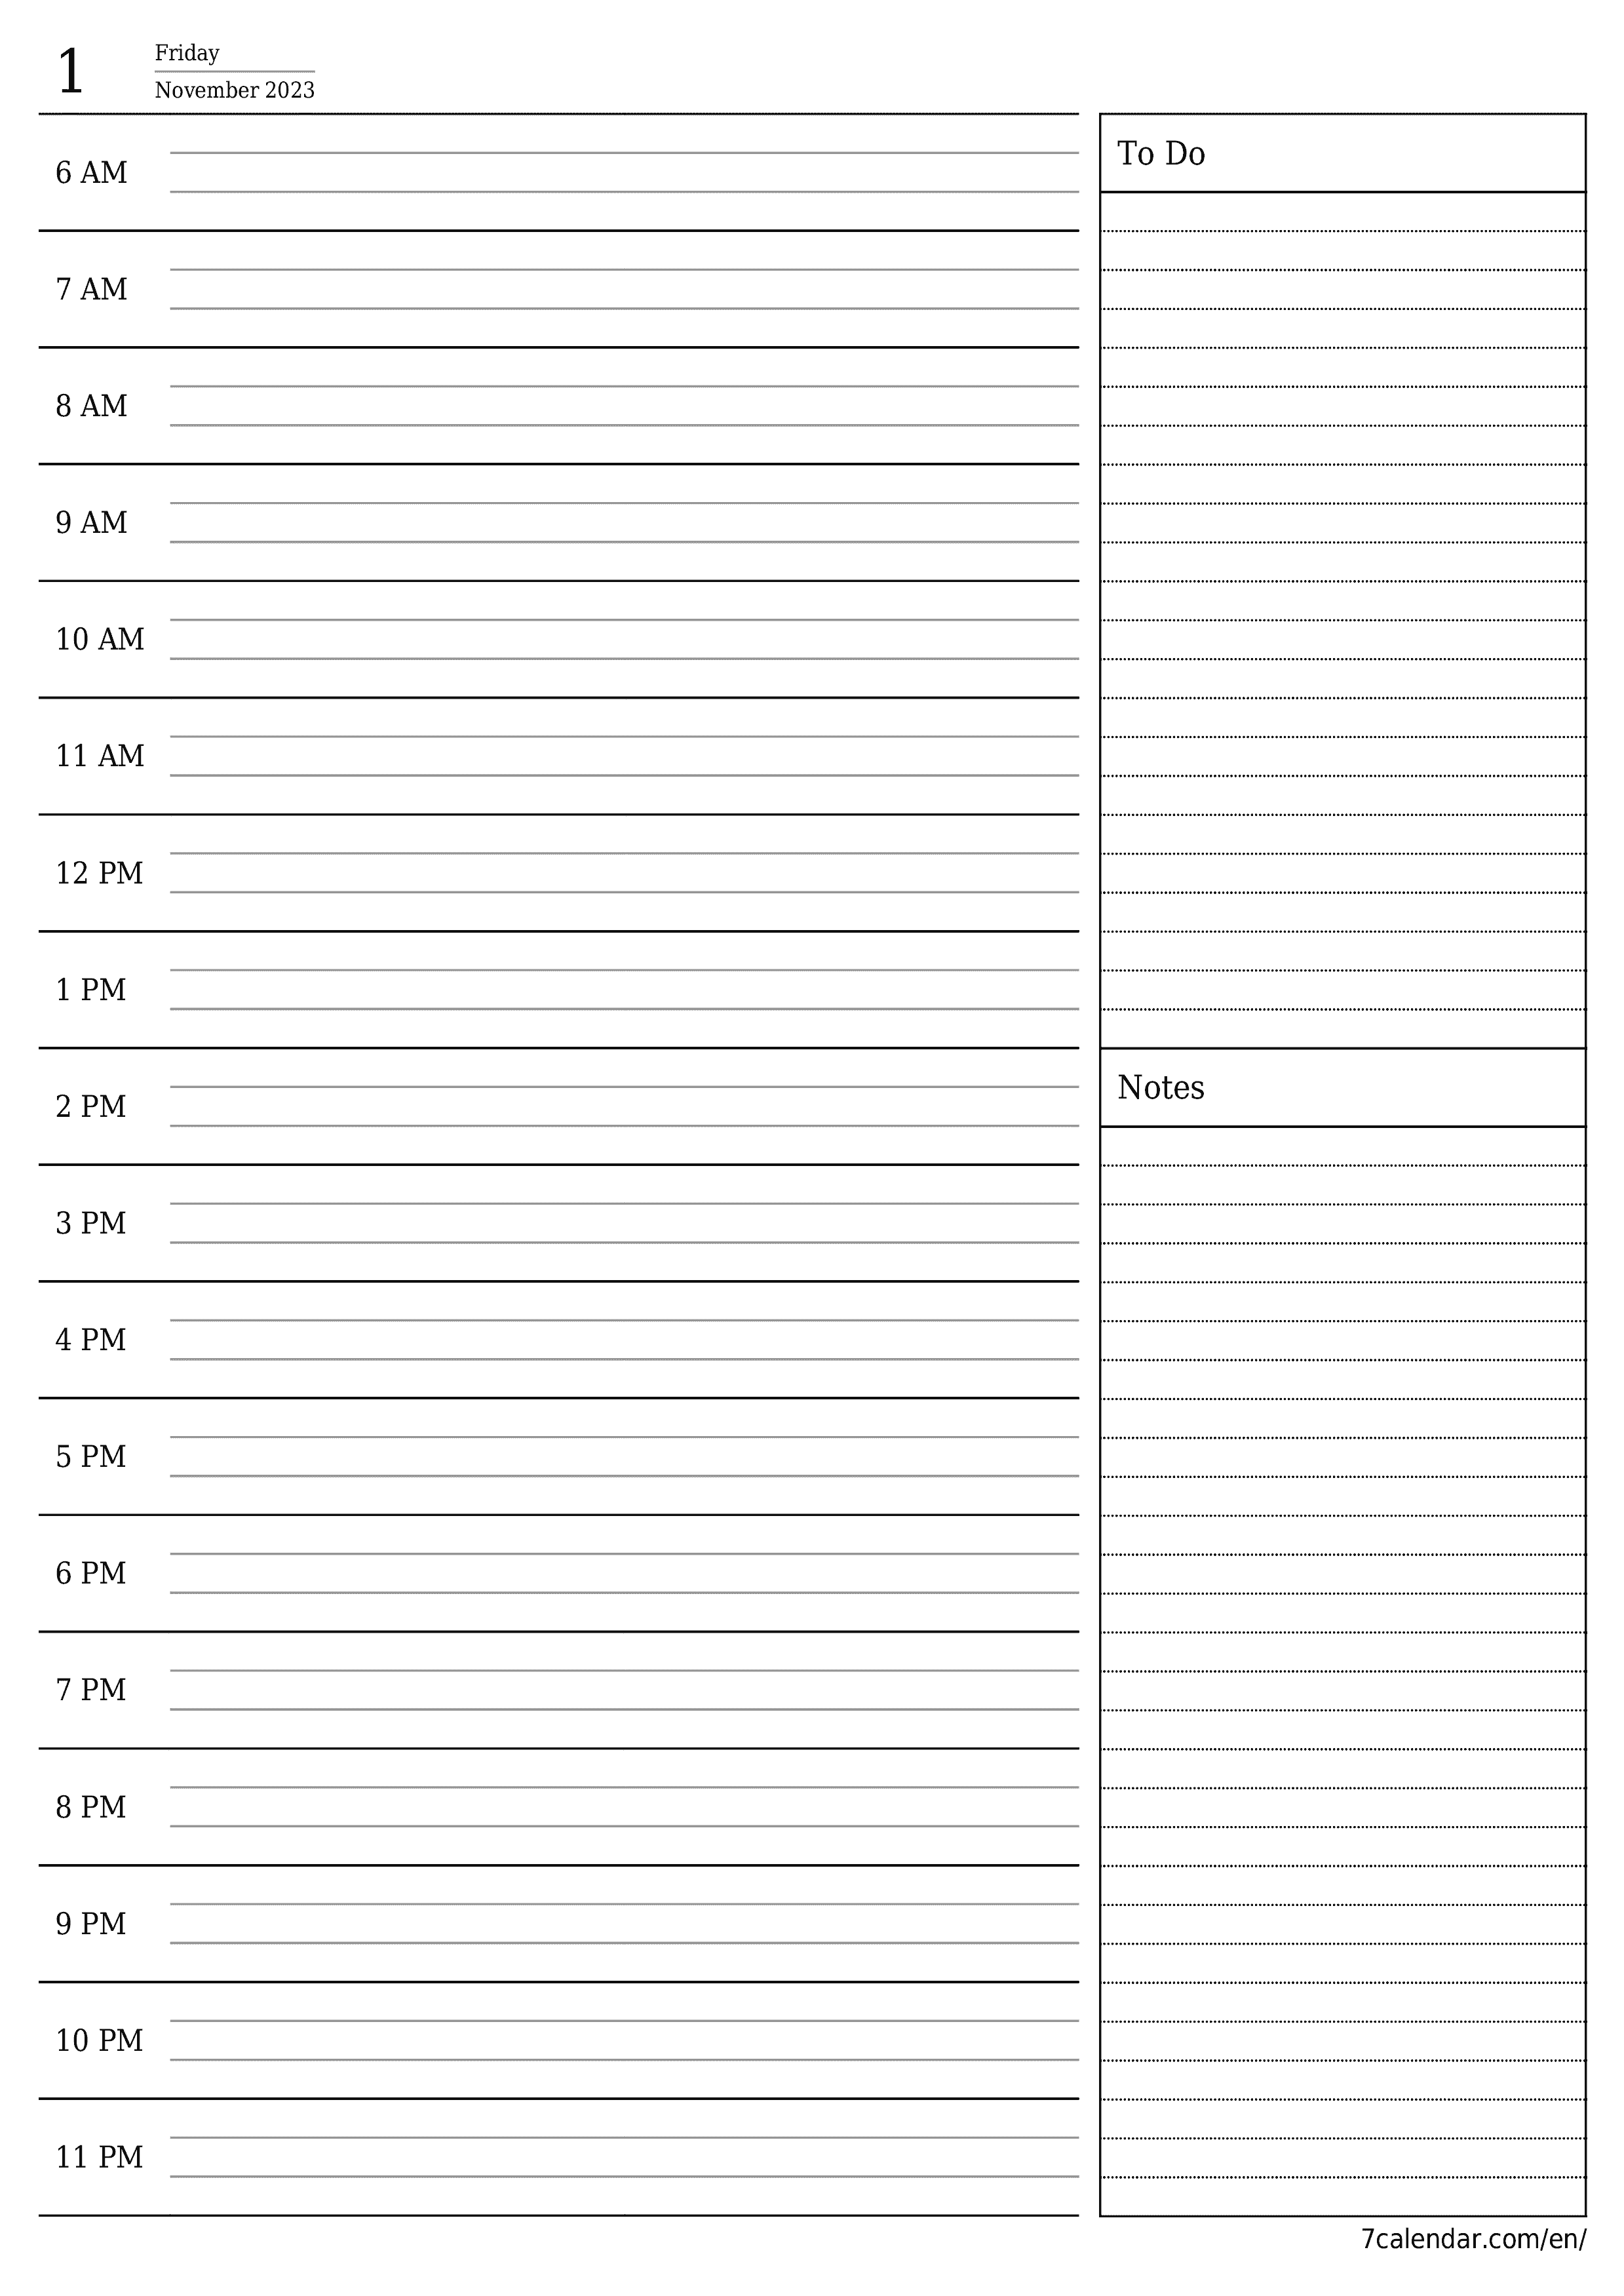 Blank daily printable calendar and planner for day November 2023 with notes, save and print to PDF PNG English - 7calendar.com